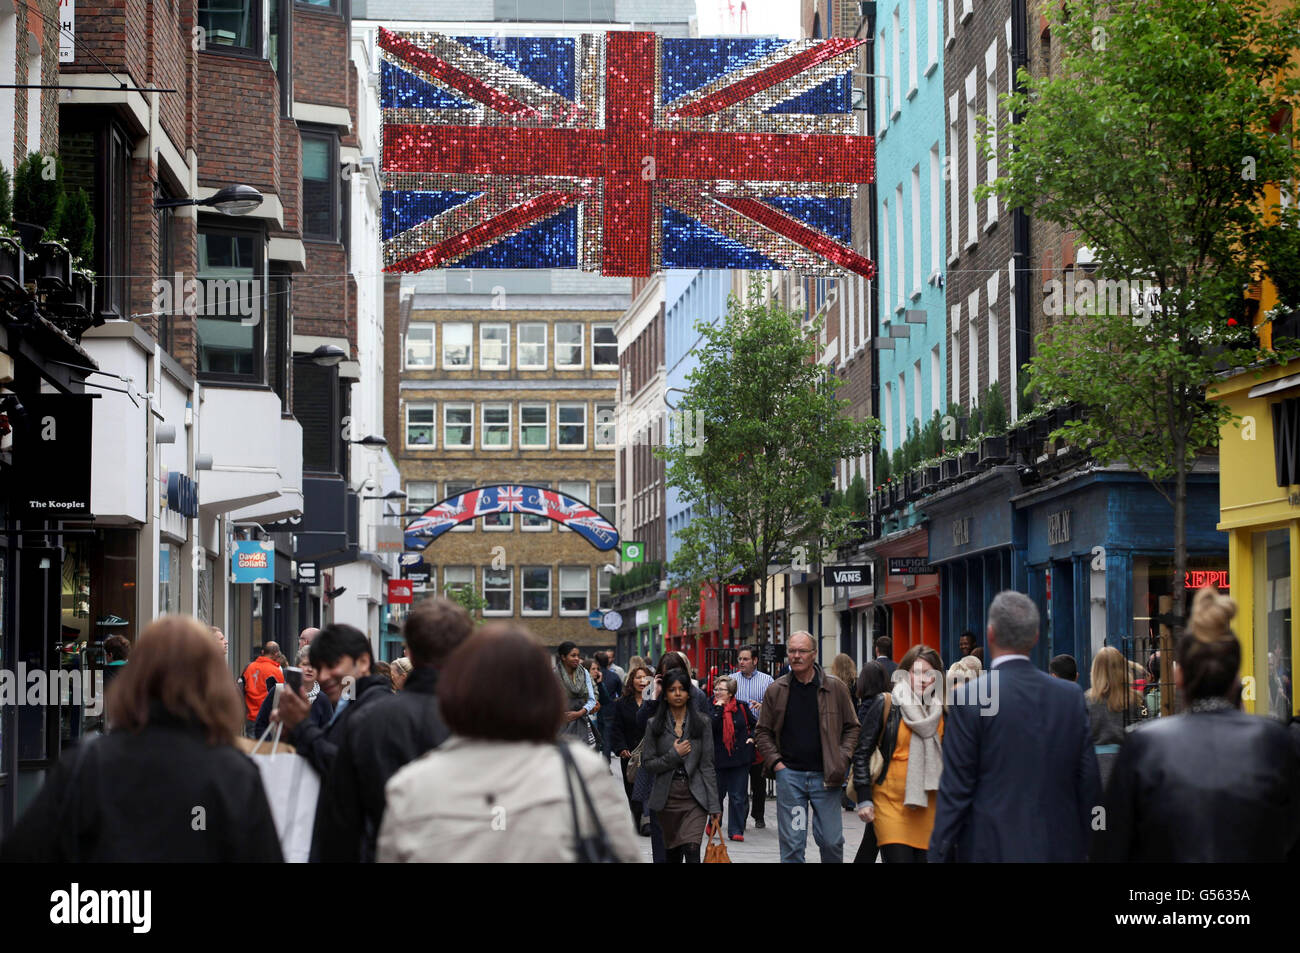 A deconstructed 3 dimensional Union flag covered in thousands of metallic red, white and blue shimmer discs is suspended above Carnaby Street in central London as part of the oversized public art installations for the Diamond Jubilee. Stock Photo